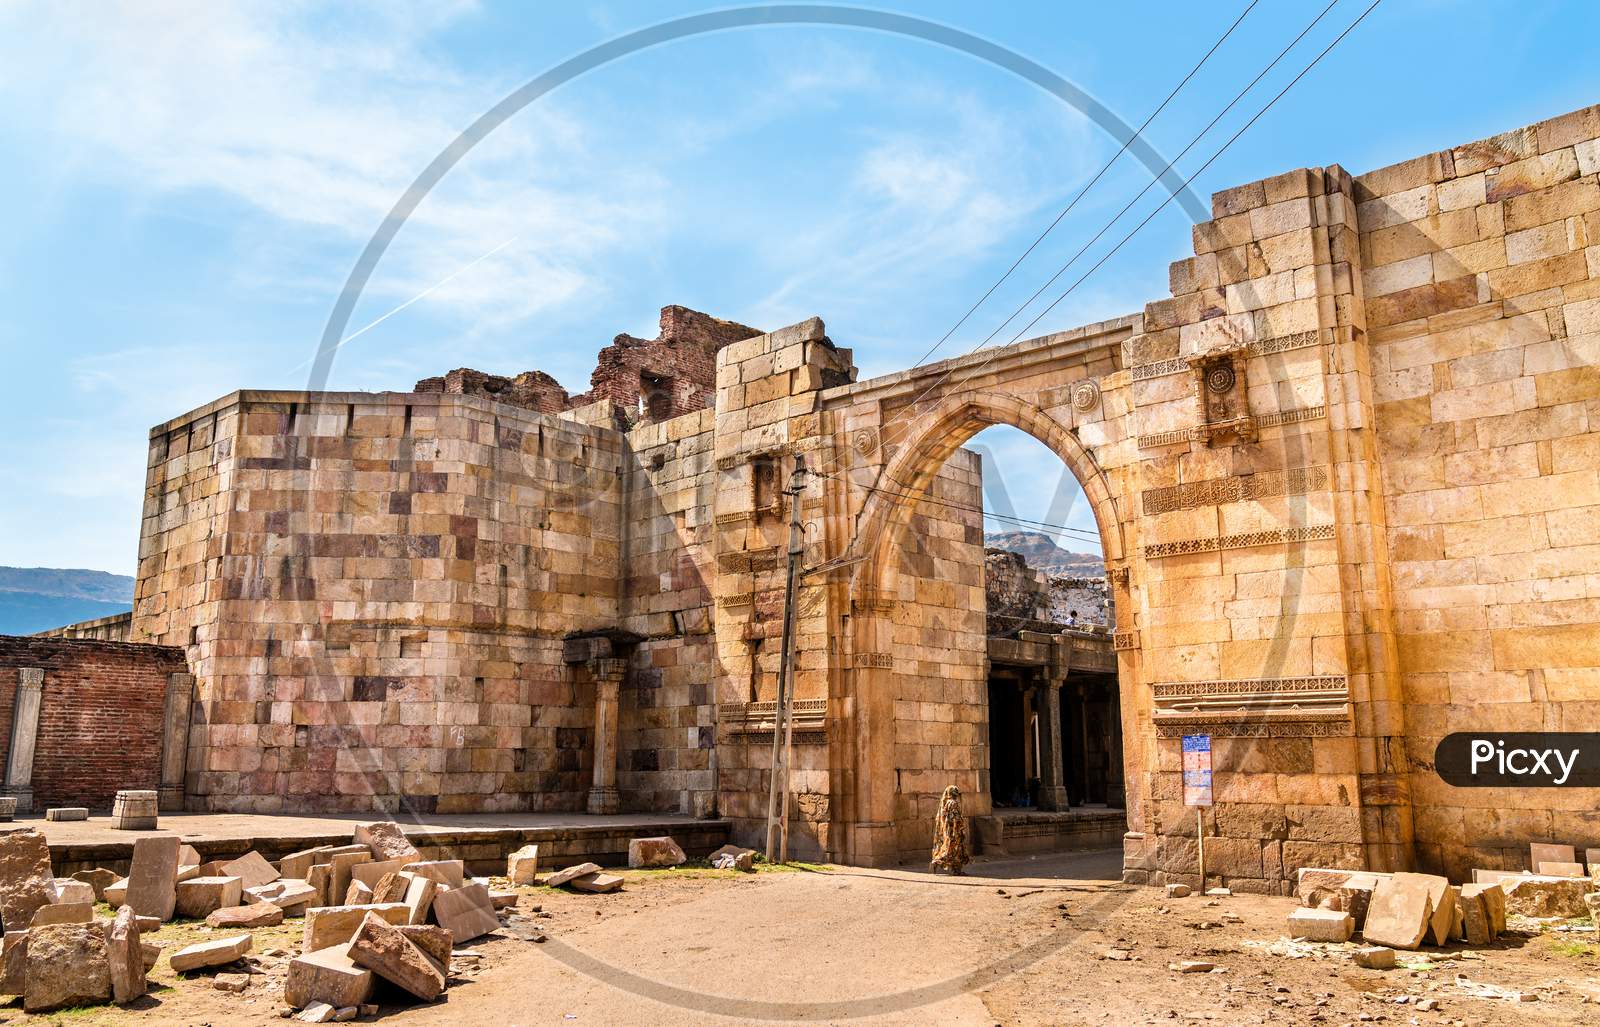 Godhra Eastern Gate Of Champaner Fort - Unesco Heritage Site In Gujarat, India